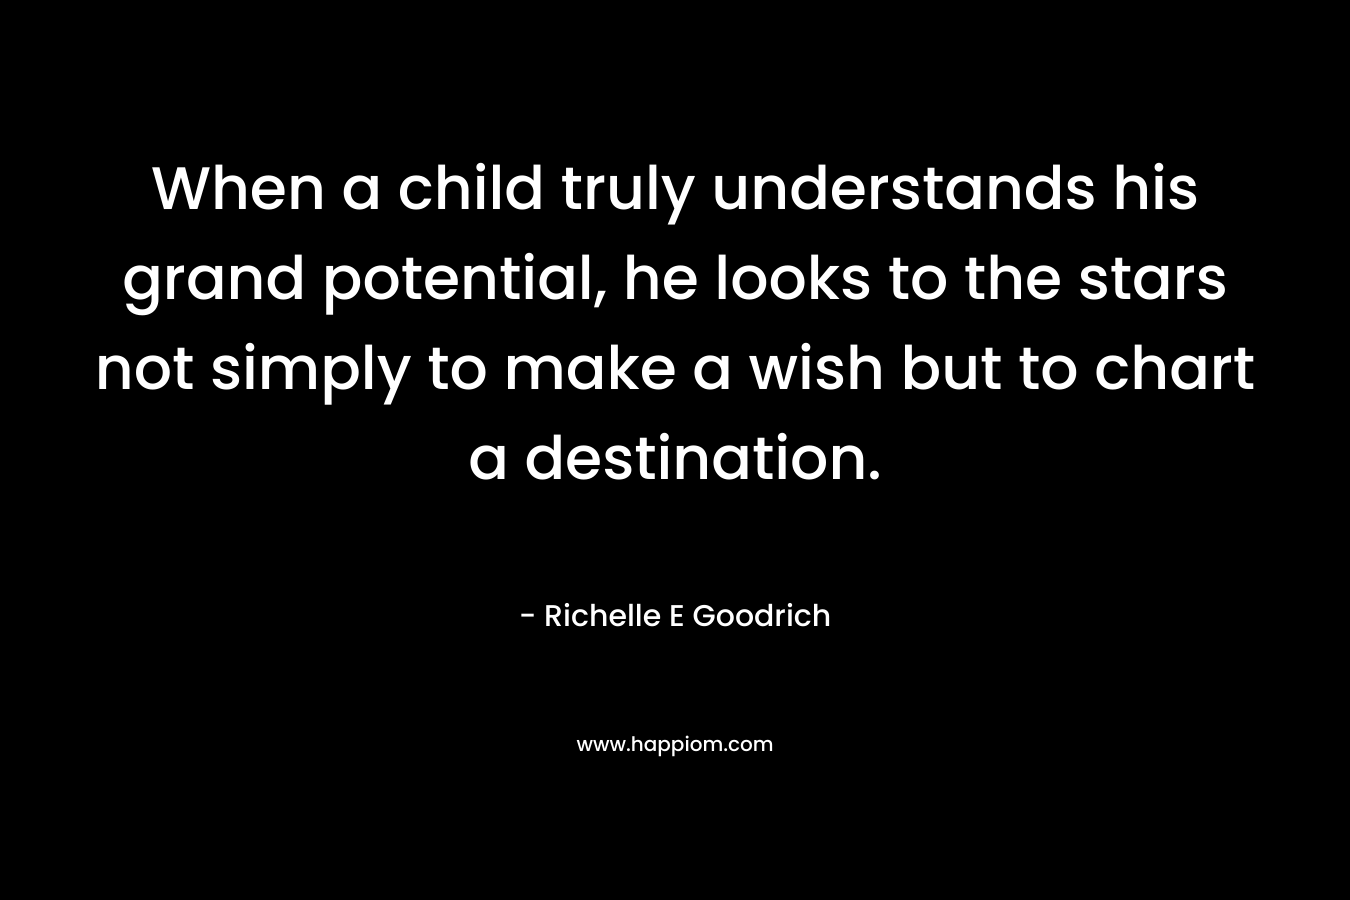 When a child truly understands his grand potential, he looks to the stars not simply to make a wish but to chart a destination.